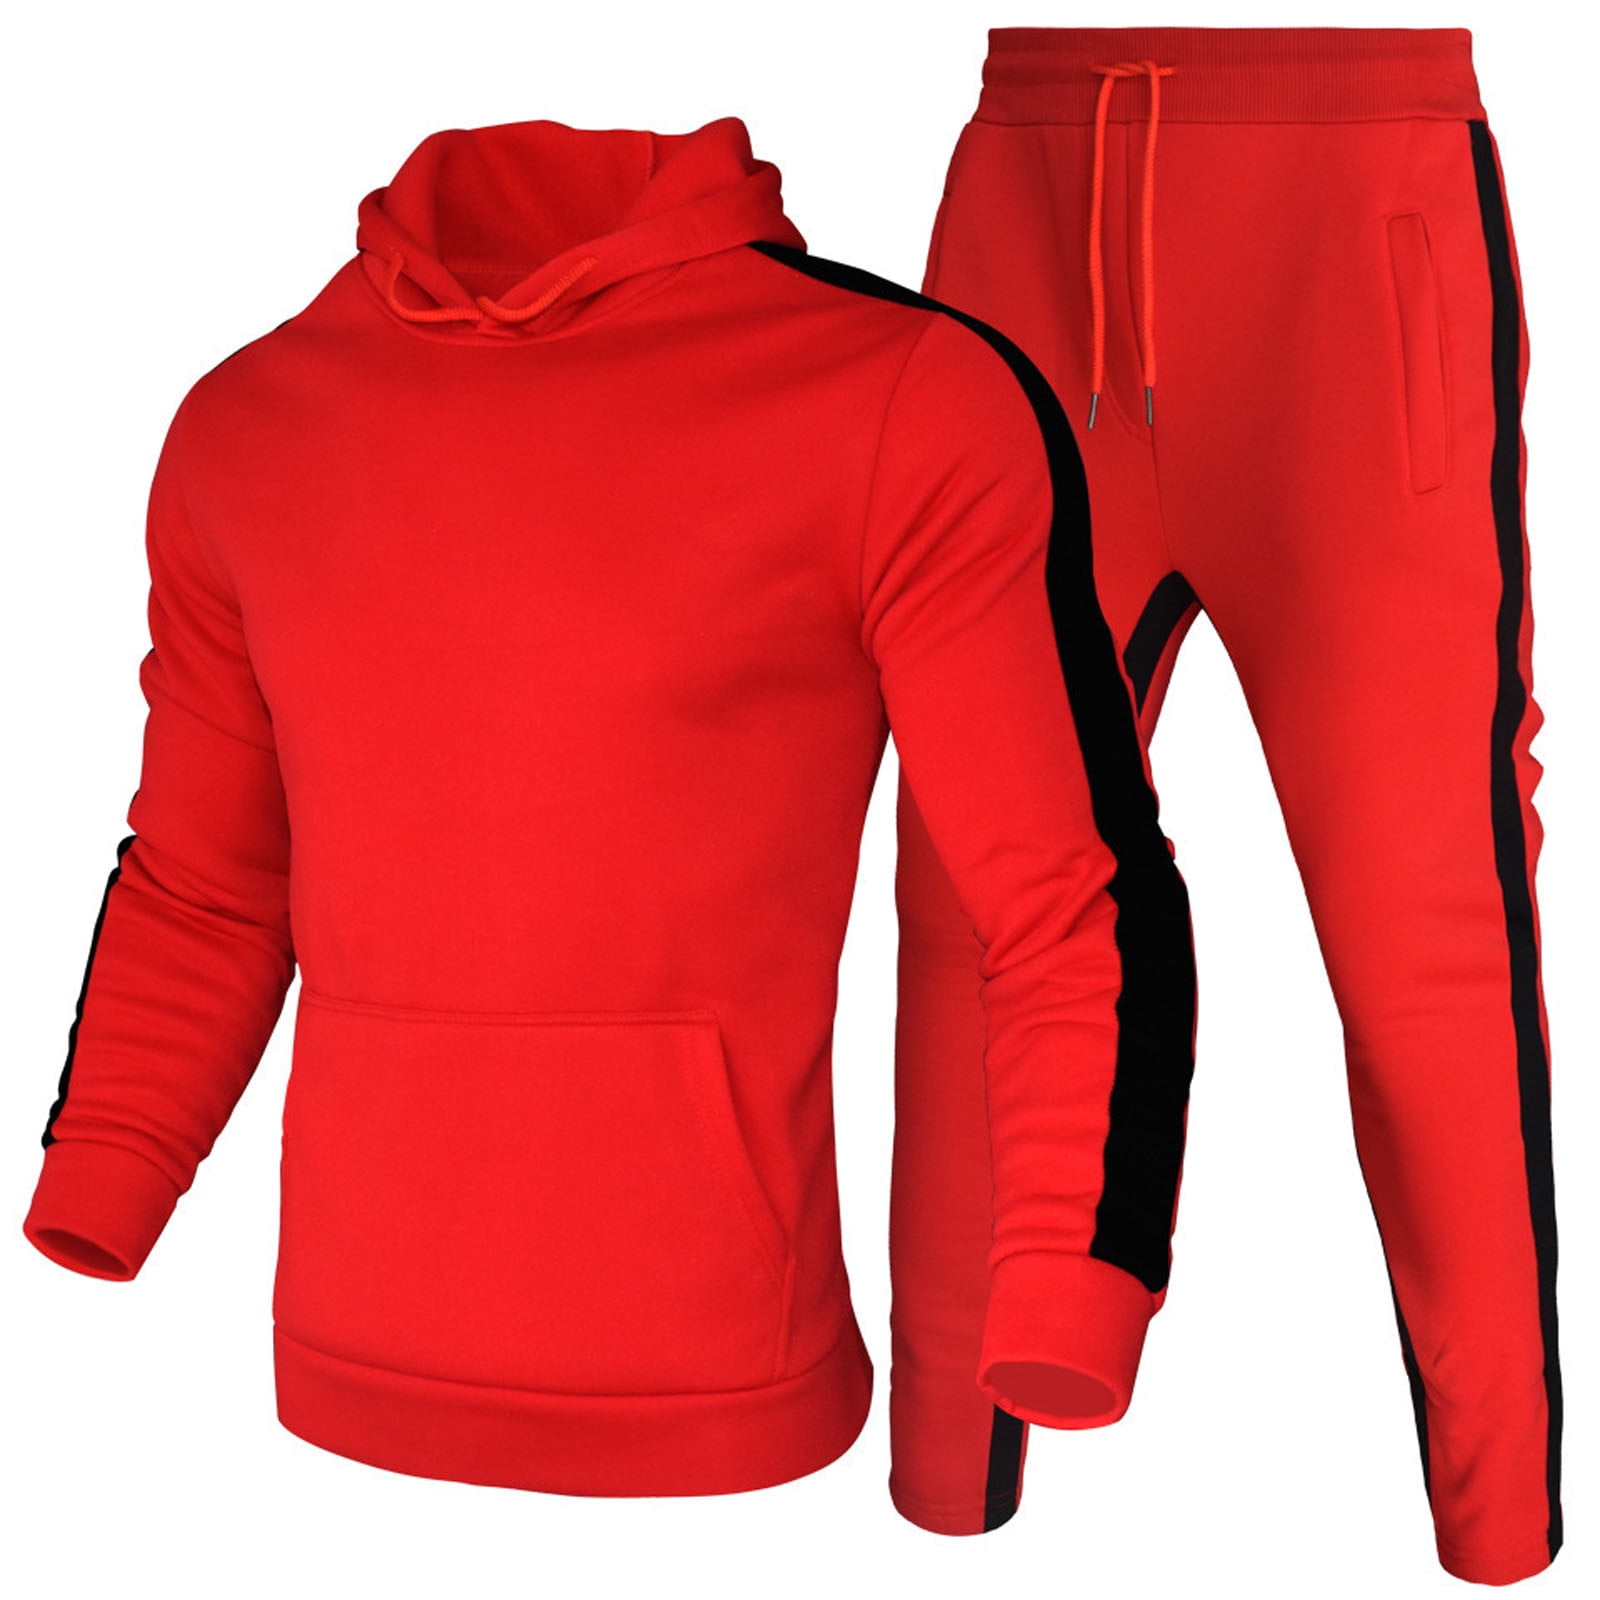 Buy CHKOKKO Maroon Grey Men Winter Tracksuit For Gym And Sports online